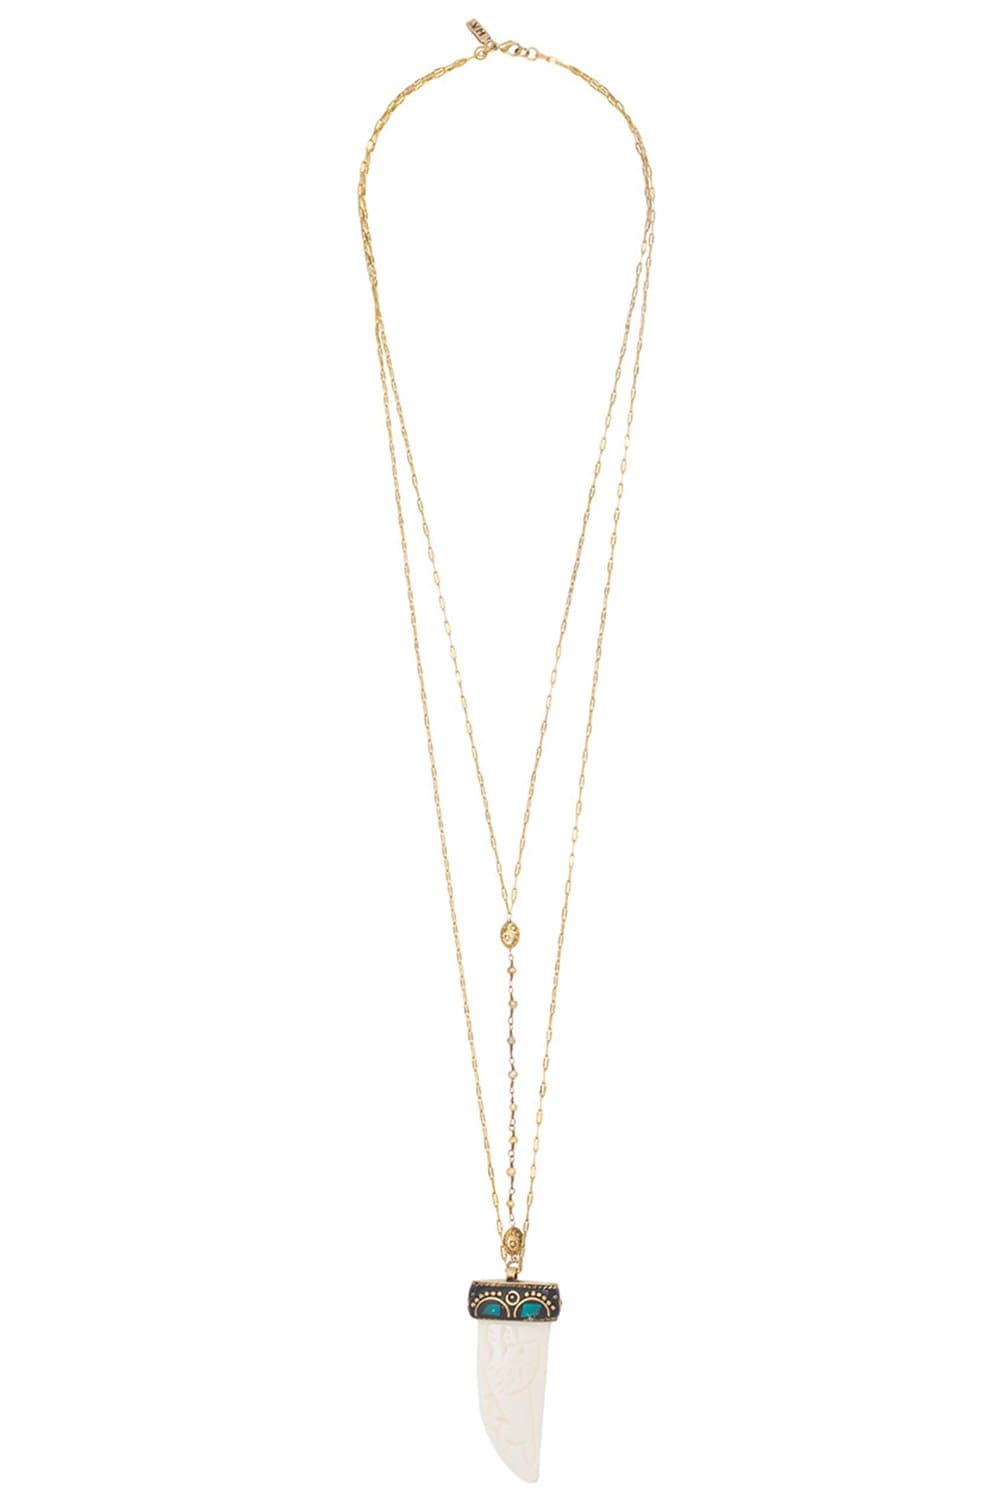 Vanessa Mooney Jewelry Time Comes Around Necklace in Gold